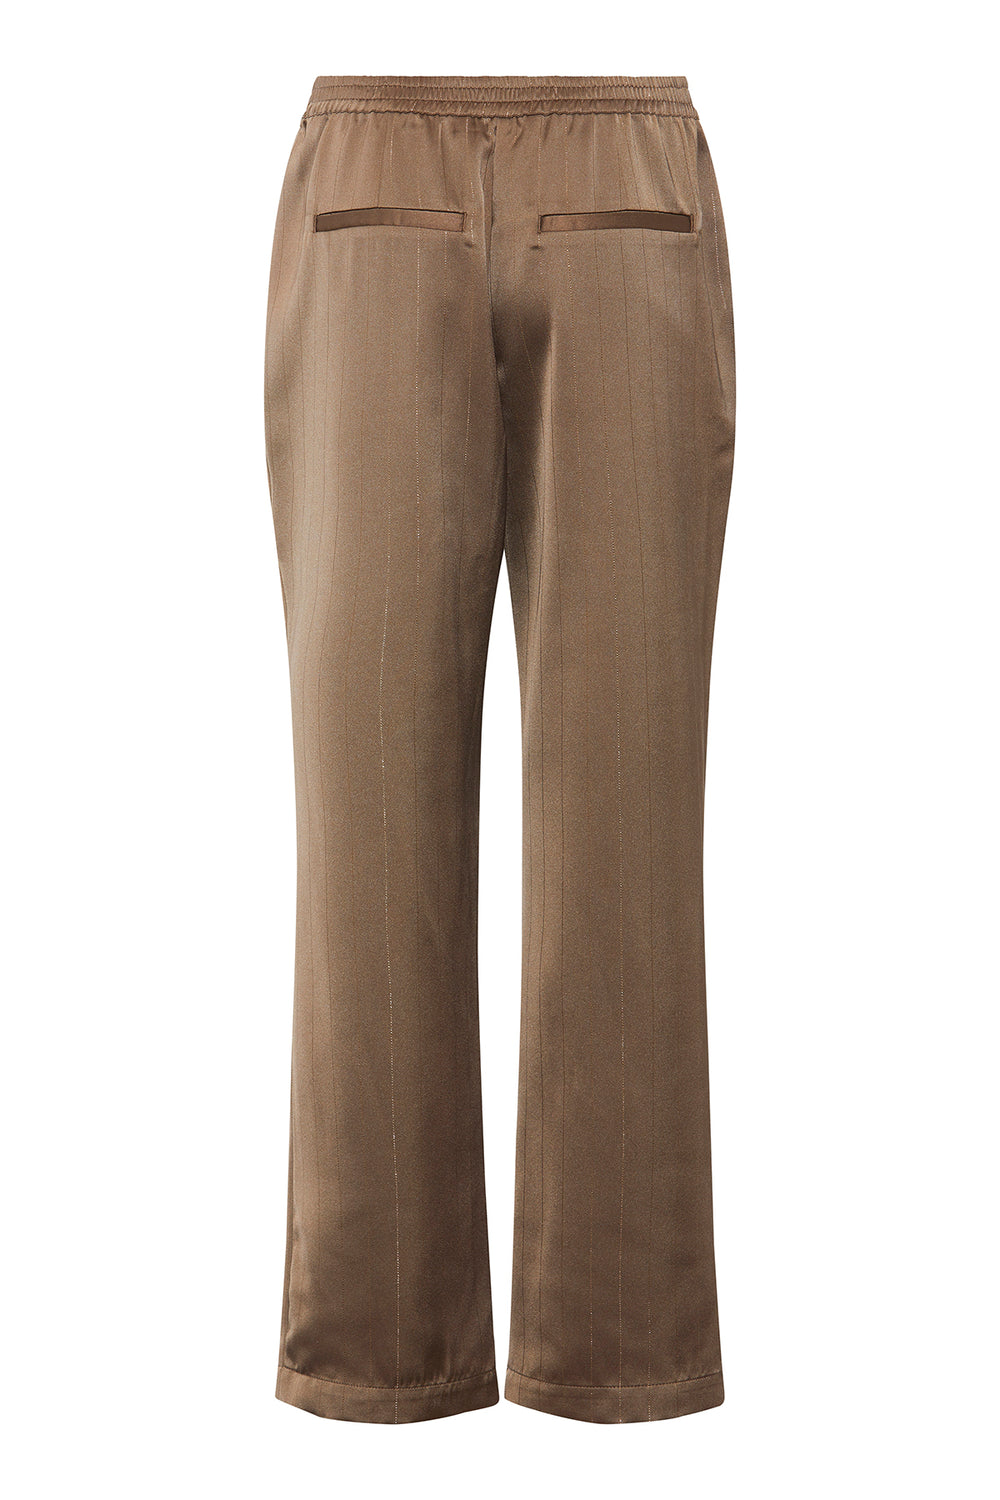 PBO Amalie pants TROUSERS 764 Gold earth